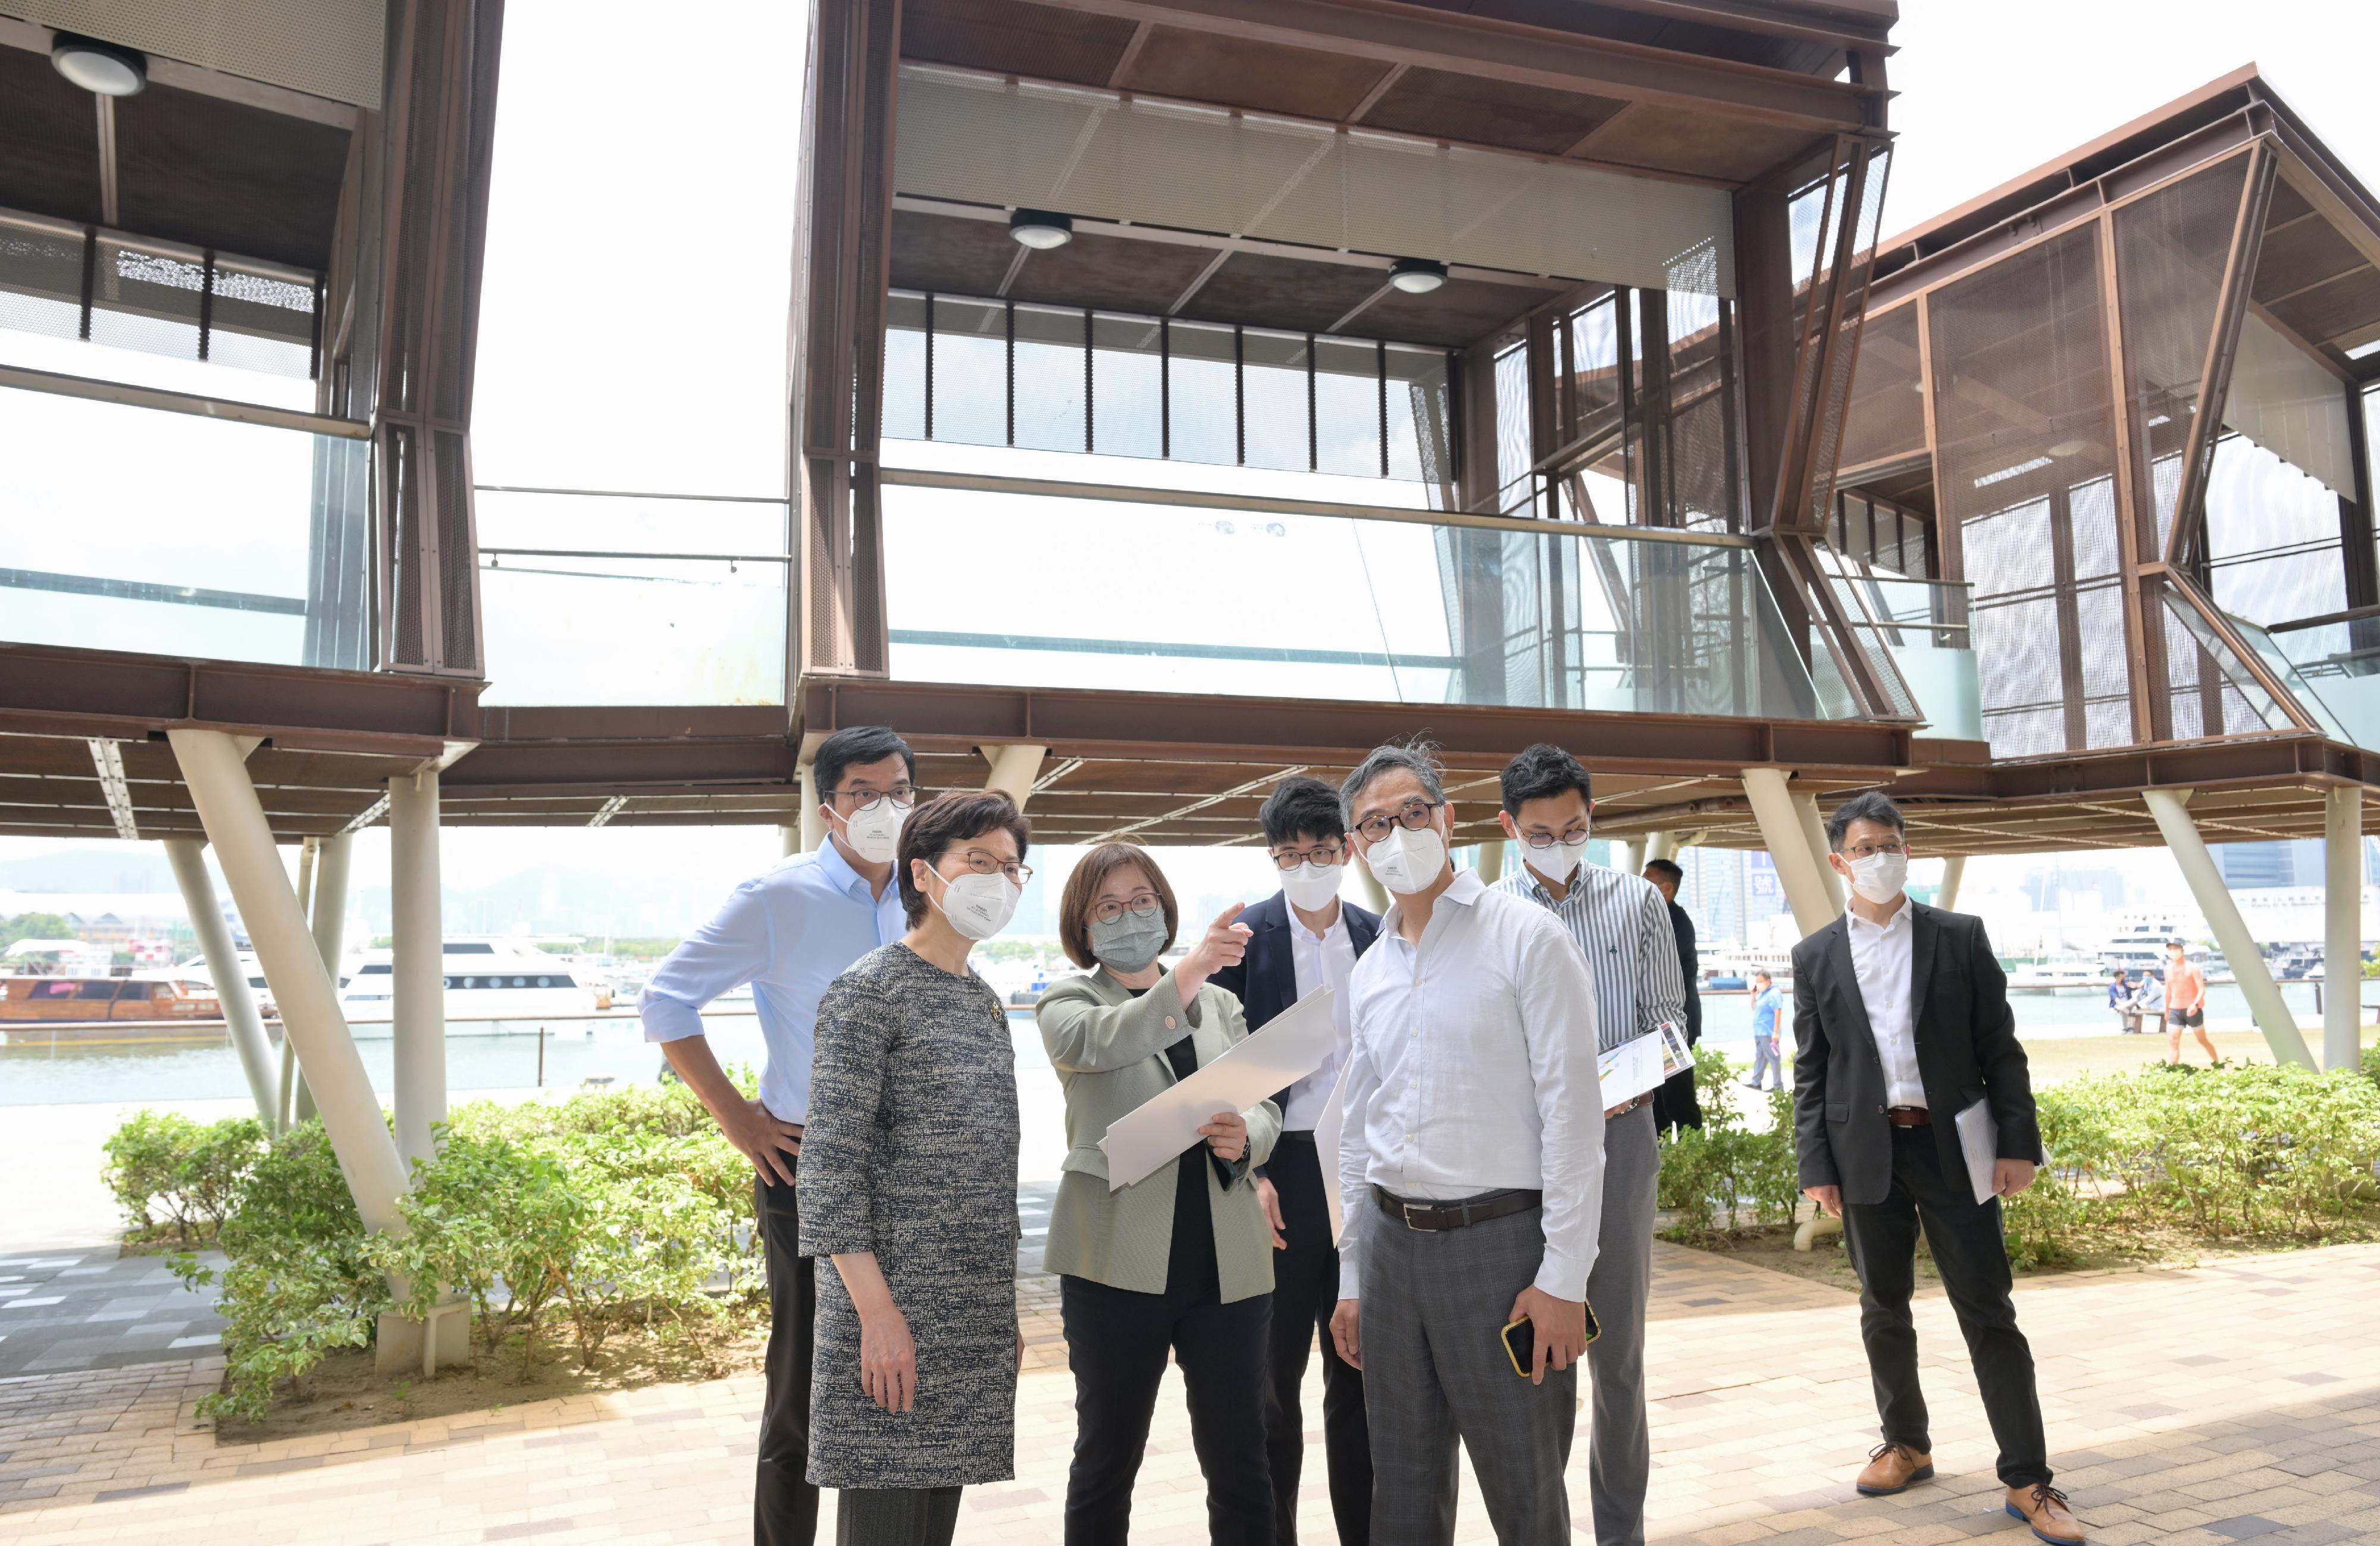 The Chief Executive, Mrs Carrie Lam, today (April 29) visited the Energizing Kowloon East Office (EKEO) and toured the area to survey the latest developments of the Energizing Kowloon East initiative. Photo shows Mrs Lam (second left), accompanied by the Secretary for Development, Mr Michael Wong (first left), and the Permanent Secretary for Development (Works), Mr Ricky Lau (third right), receiving a briefing on the latest development of the Kwun Tong Promenade by the Head of the EKEO, Ms Amy Cheung (third left).